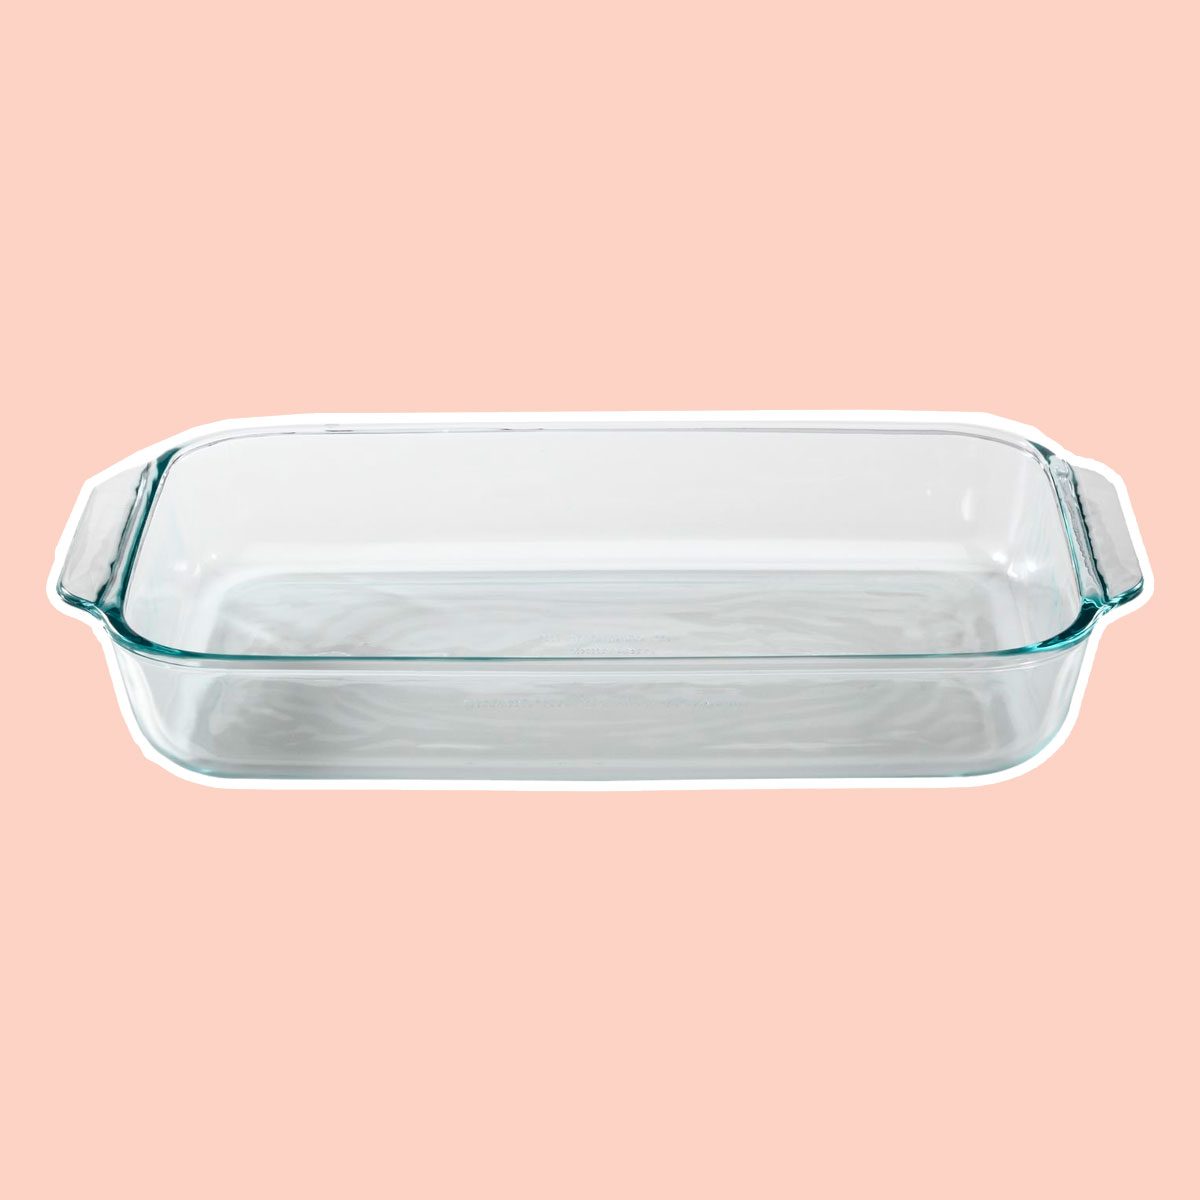 What Are the Characteristics of a Glass Baking Pan?